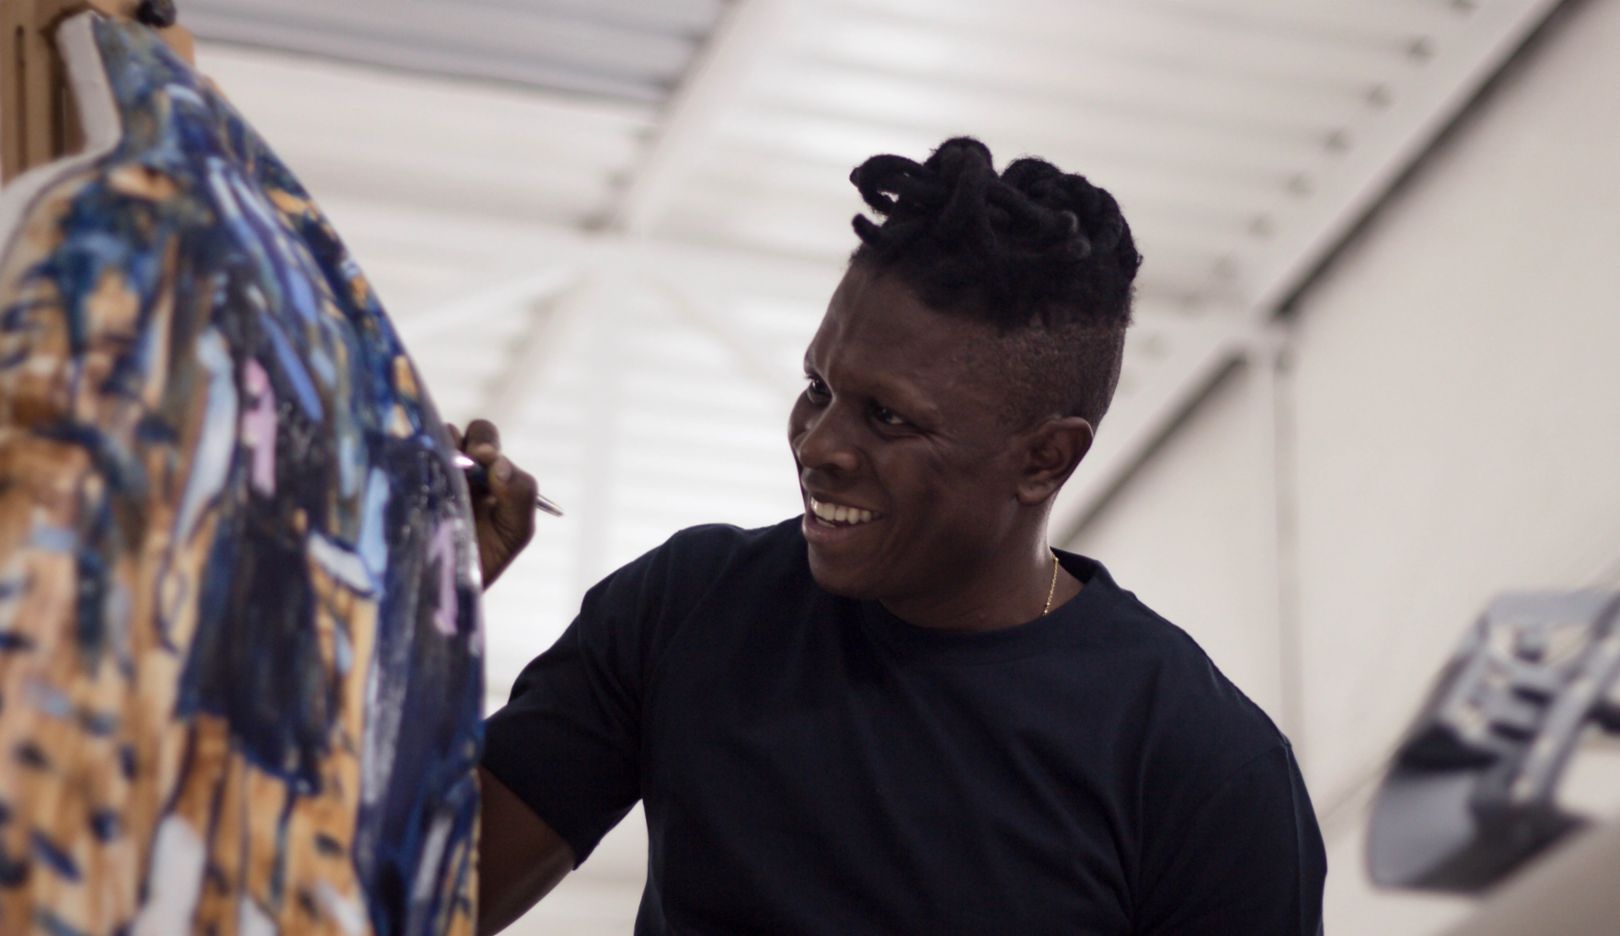 Pure inspiration: Nelson Makamo does not plan his works—his art arises from instantaneous intuition.